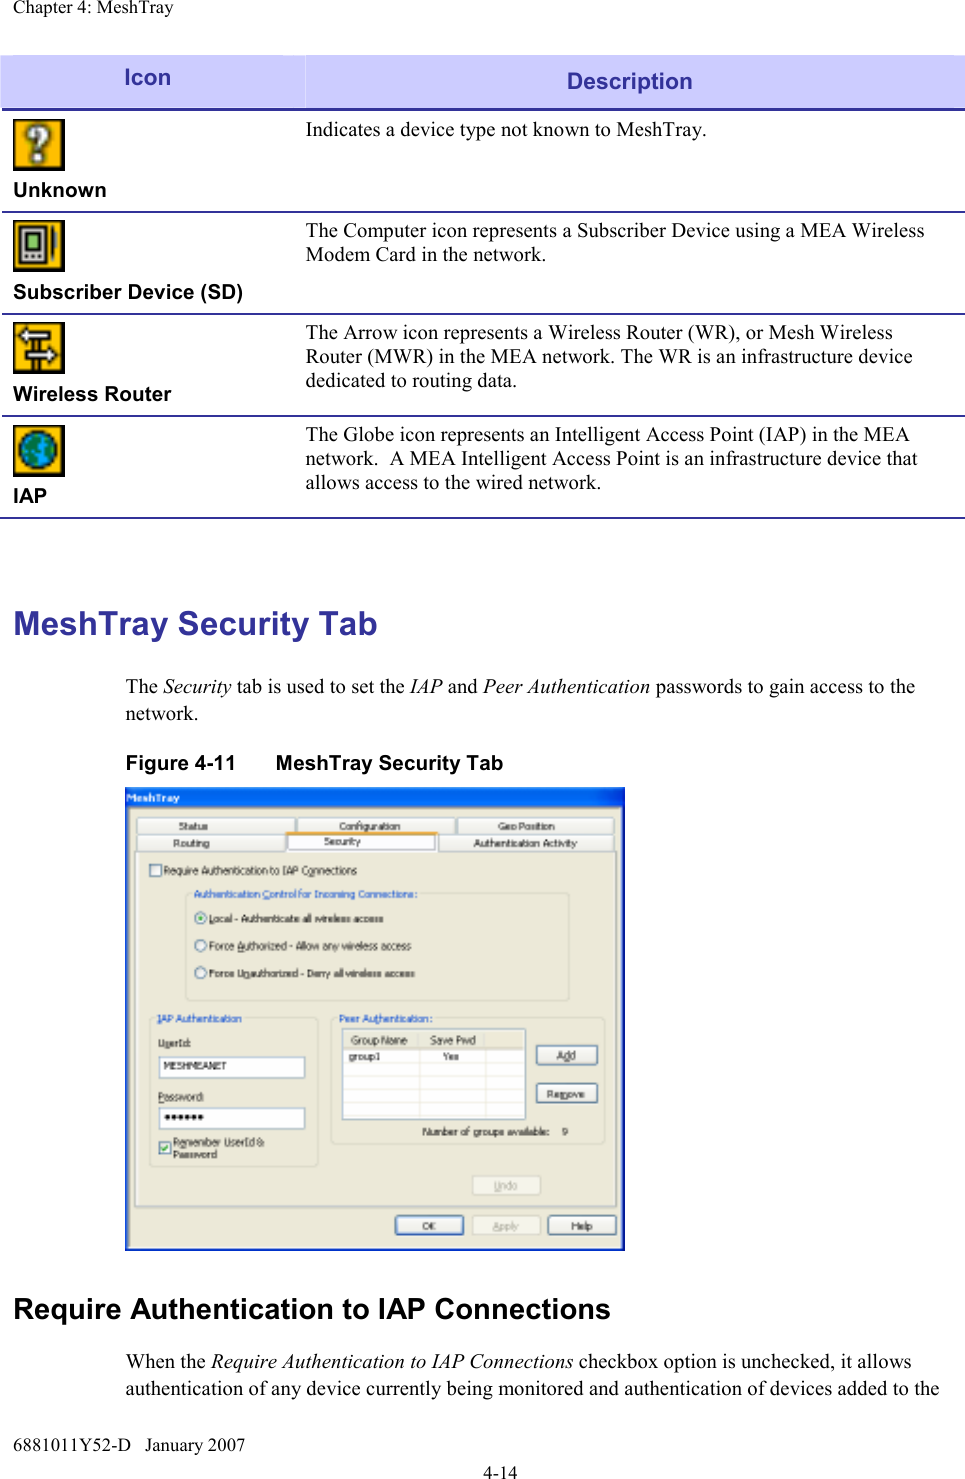 Chapter 4: MeshTray 6881011Y52-D   January 2007 4-14 Icon   Description  Unknown Indicates a device type not known to MeshTray.   Subscriber Device (SD) The Computer icon represents a Subscriber Device using a MEA Wireless Modem Card in the network.    Wireless Router The Arrow icon represents a Wireless Router (WR), or Mesh Wireless Router (MWR) in the MEA network. The WR is an infrastructure device dedicated to routing data.    IAP The Globe icon represents an Intelligent Access Point (IAP) in the MEA network.  A MEA Intelligent Access Point is an infrastructure device that allows access to the wired network.  MeshTray Security Tab The Security tab is used to set the IAP and Peer Authentication passwords to gain access to the network. Figure 4-11  MeshTray Security Tab  Require Authentication to IAP Connections When the Require Authentication to IAP Connections checkbox option is unchecked, it allows authentication of any device currently being monitored and authentication of devices added to the 